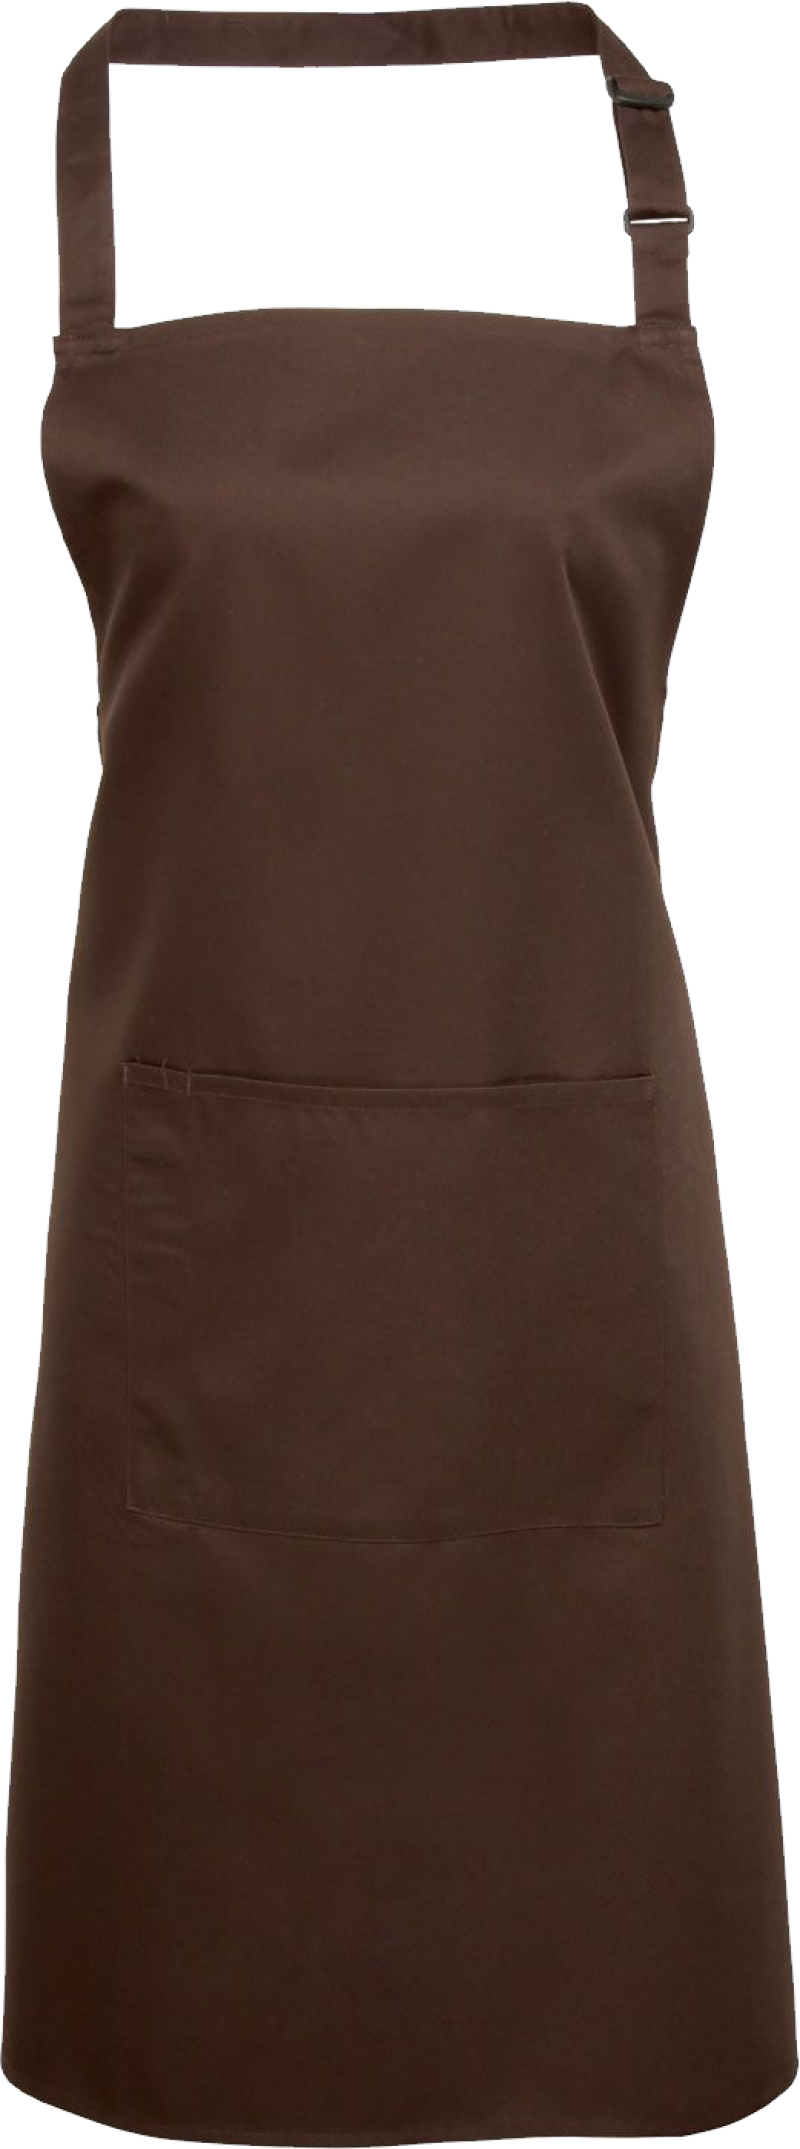 Apron For Chef PNG Image - PurePNG | Free transparent CC0 PNG Image Library